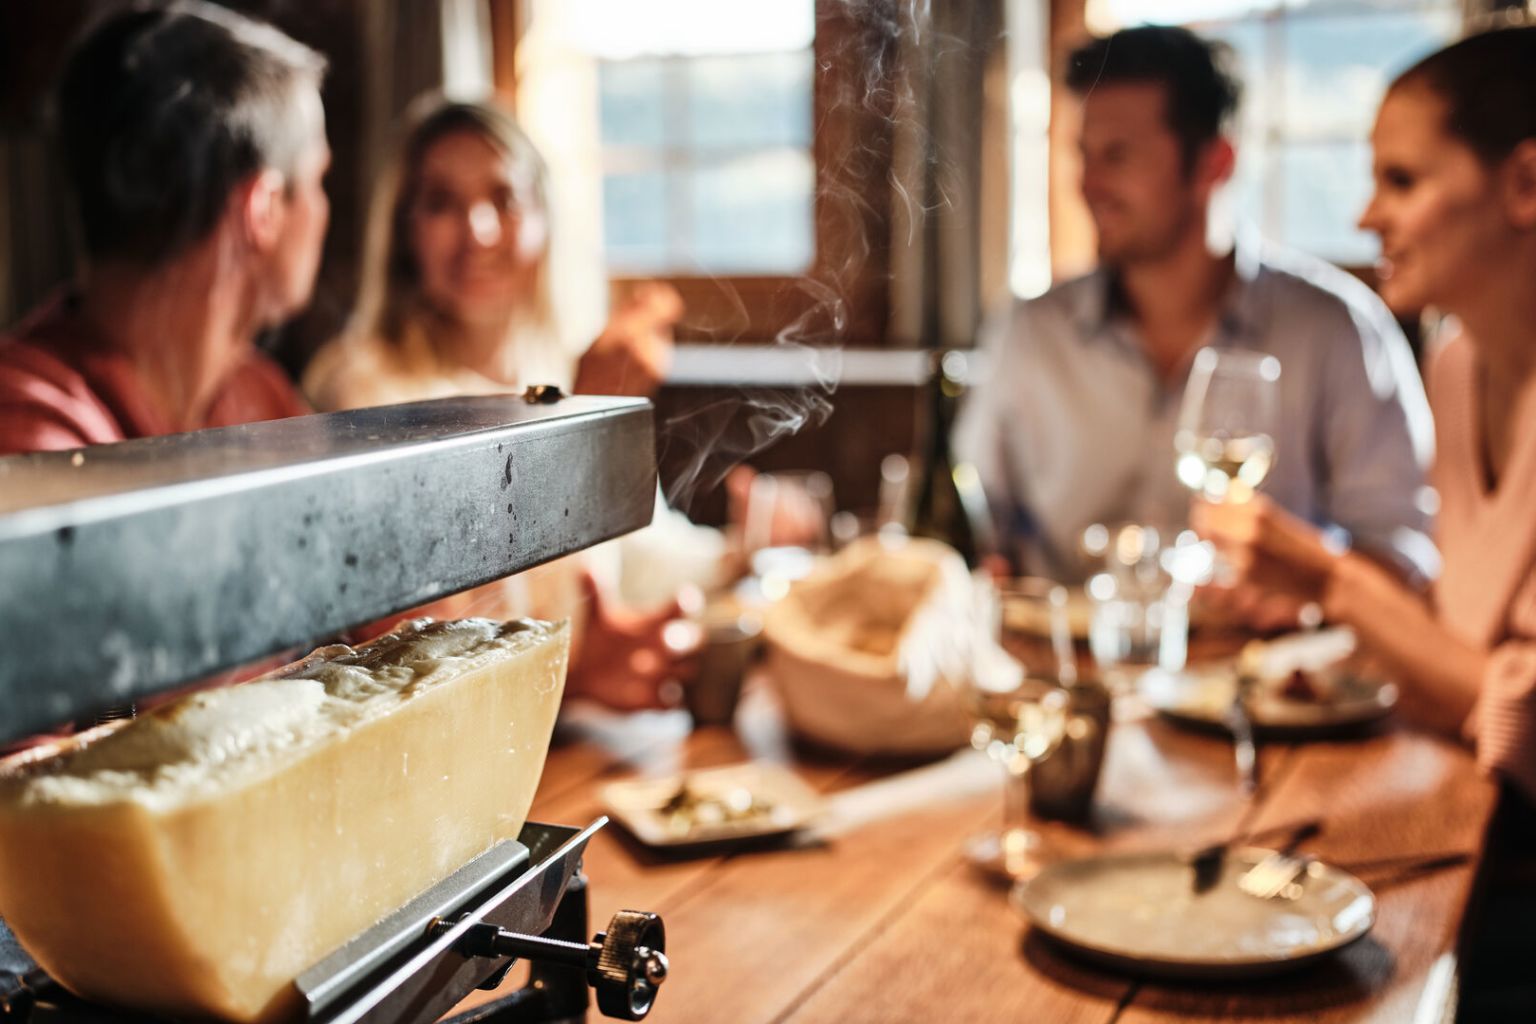 A raclette oven at a meal in a chalet, Valais, Switzerland